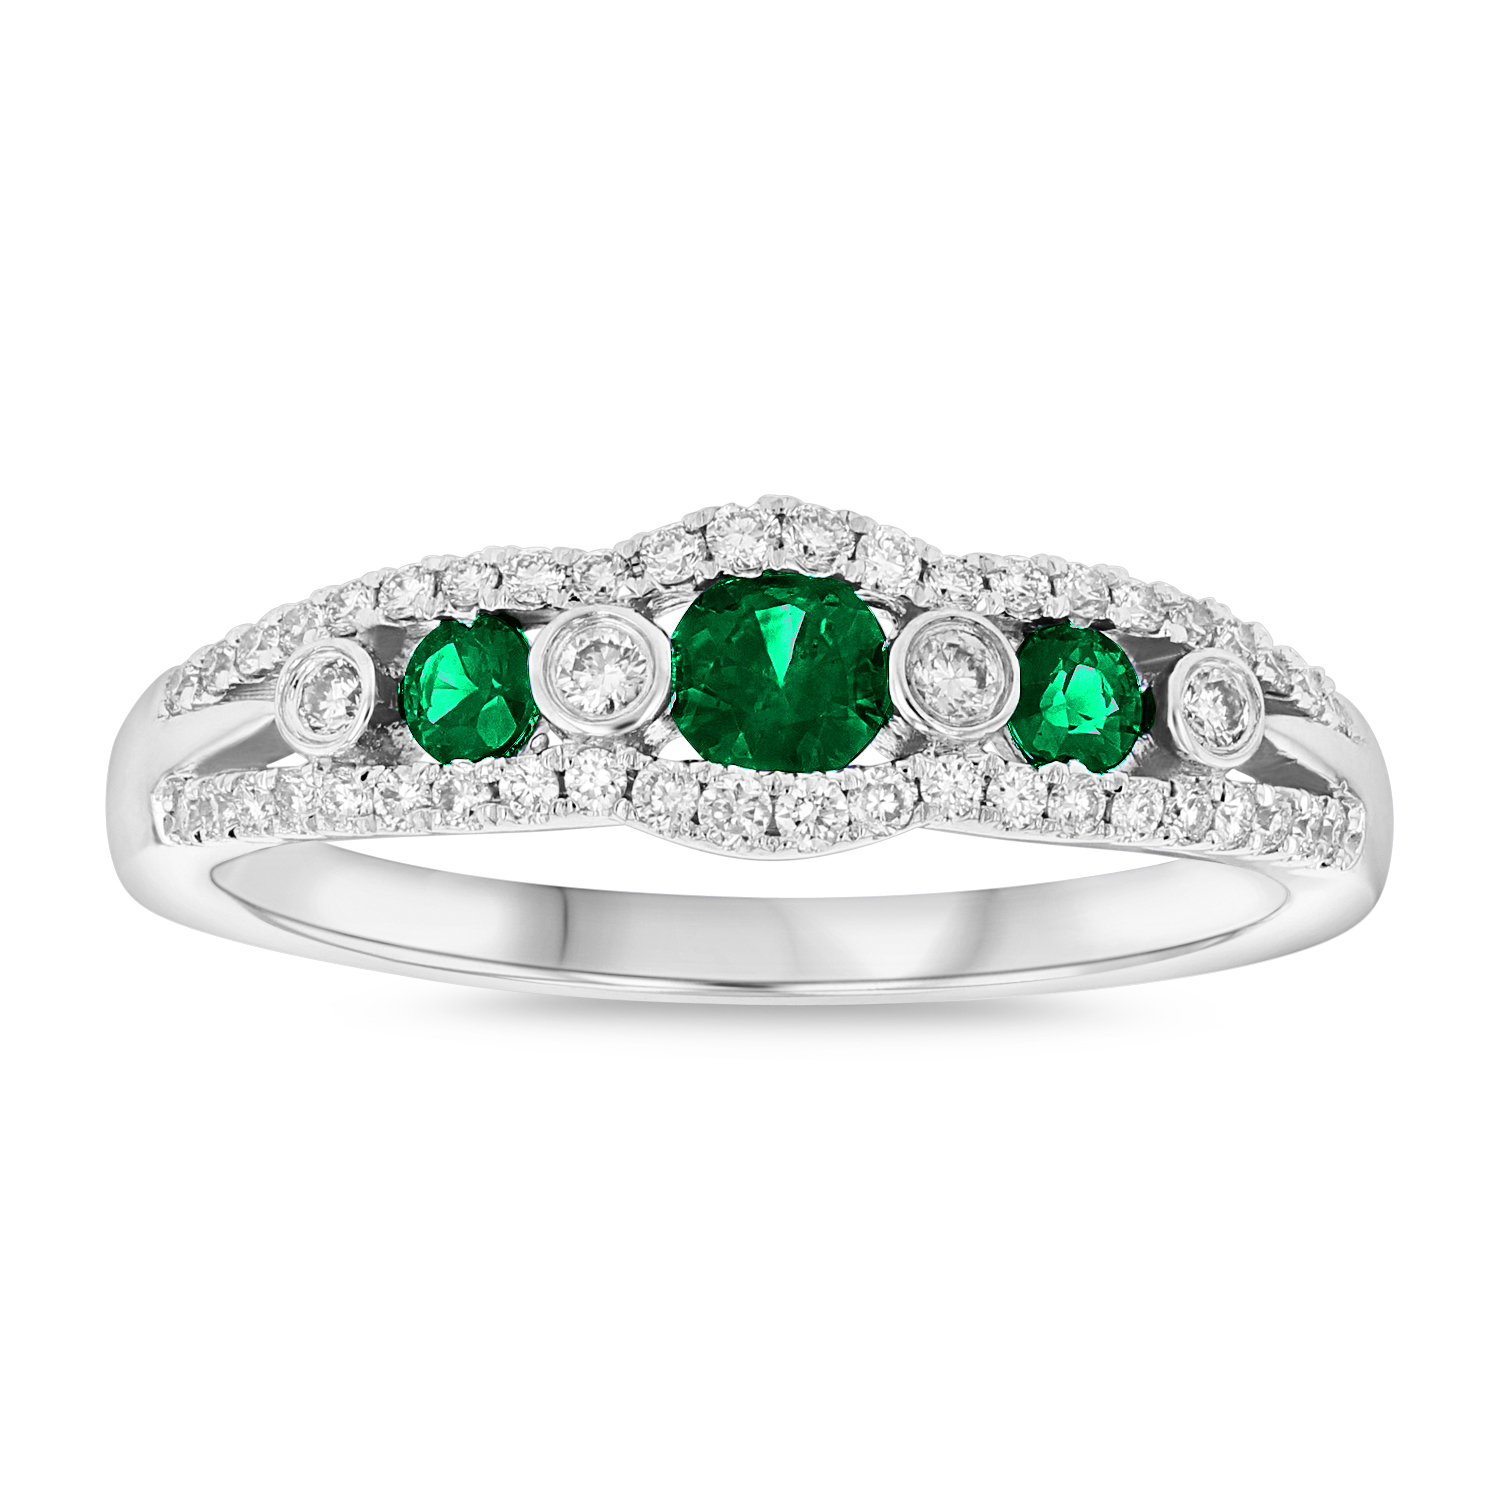 View 0.55cttw Emerald and Diamond  Ring in 14k White Gold